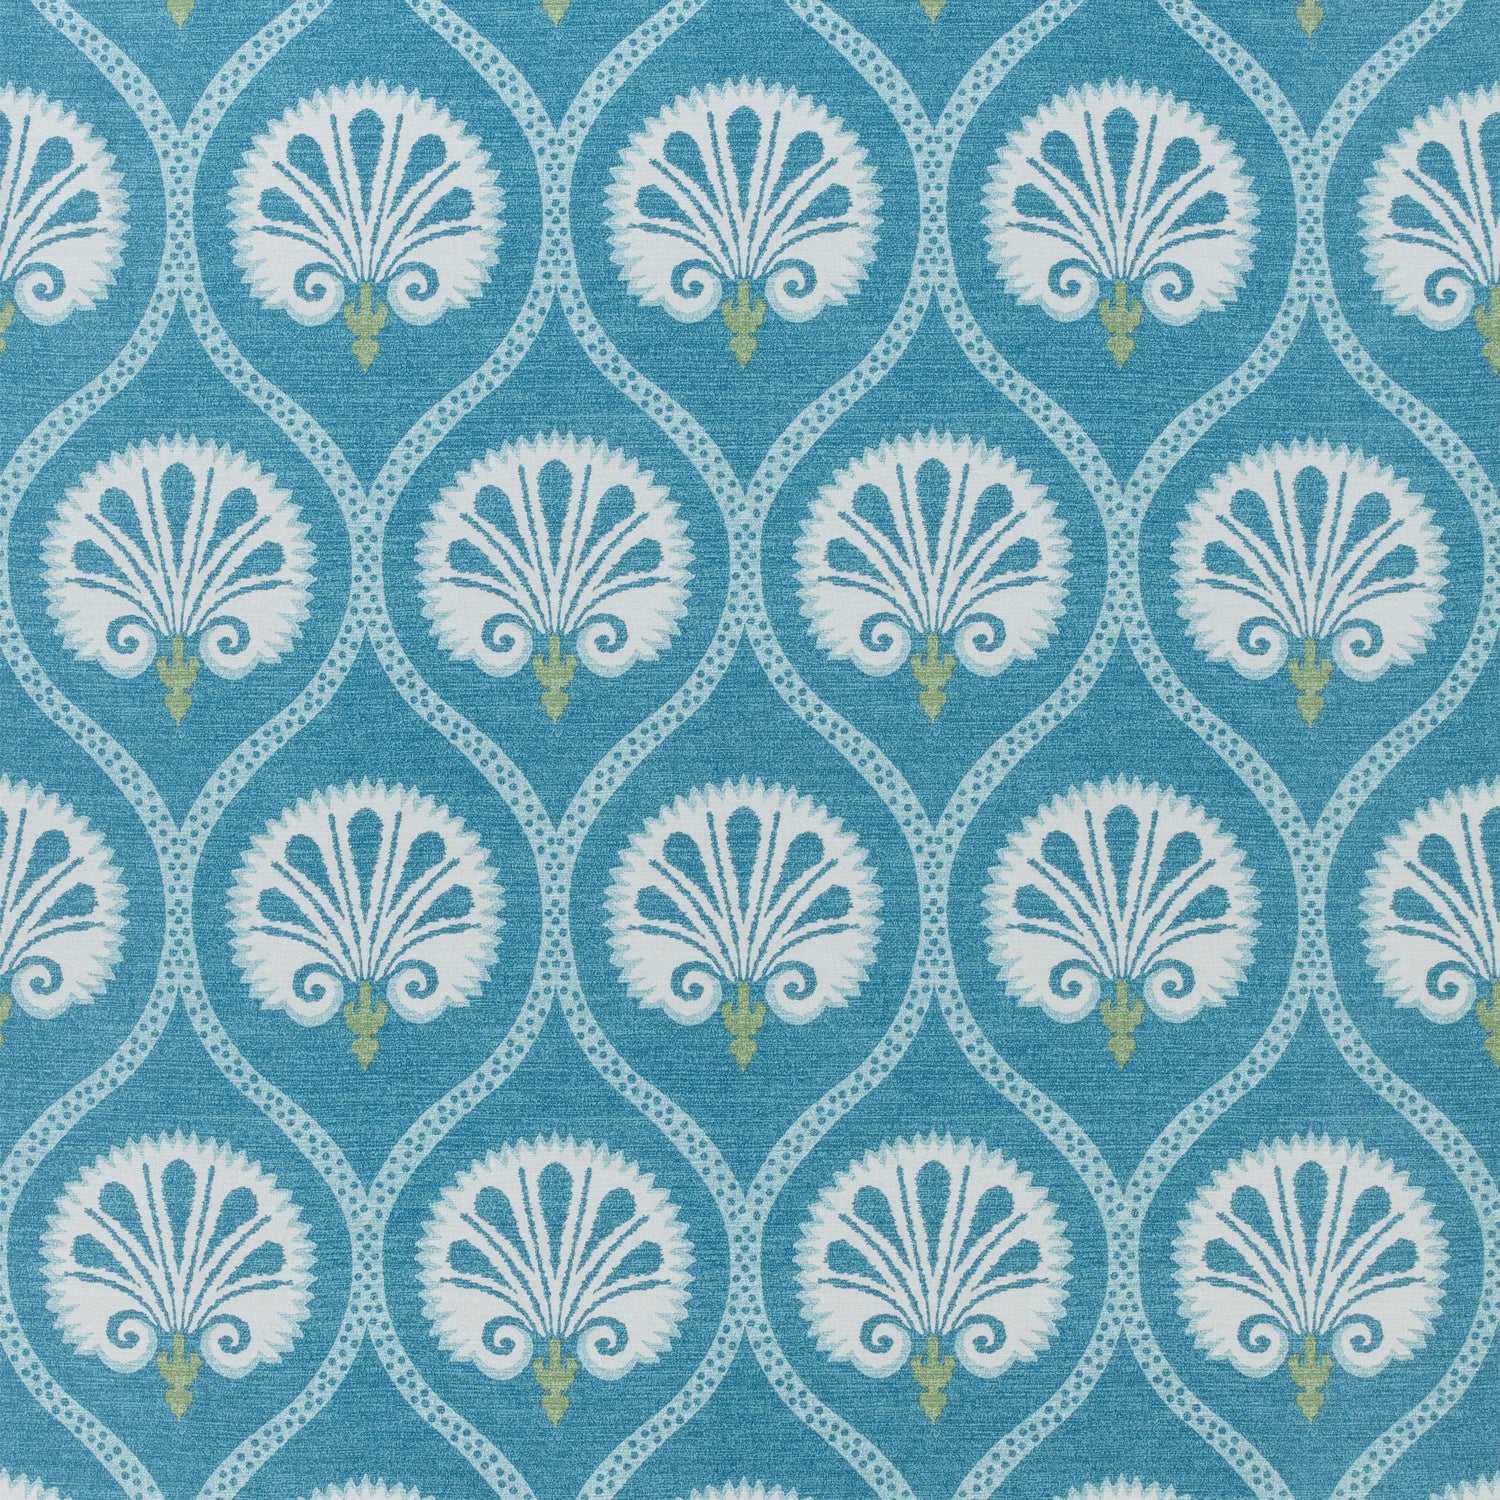 Kimberly fabric in teal color - pattern number F985020 - by Thibaut in the Greenwood collection